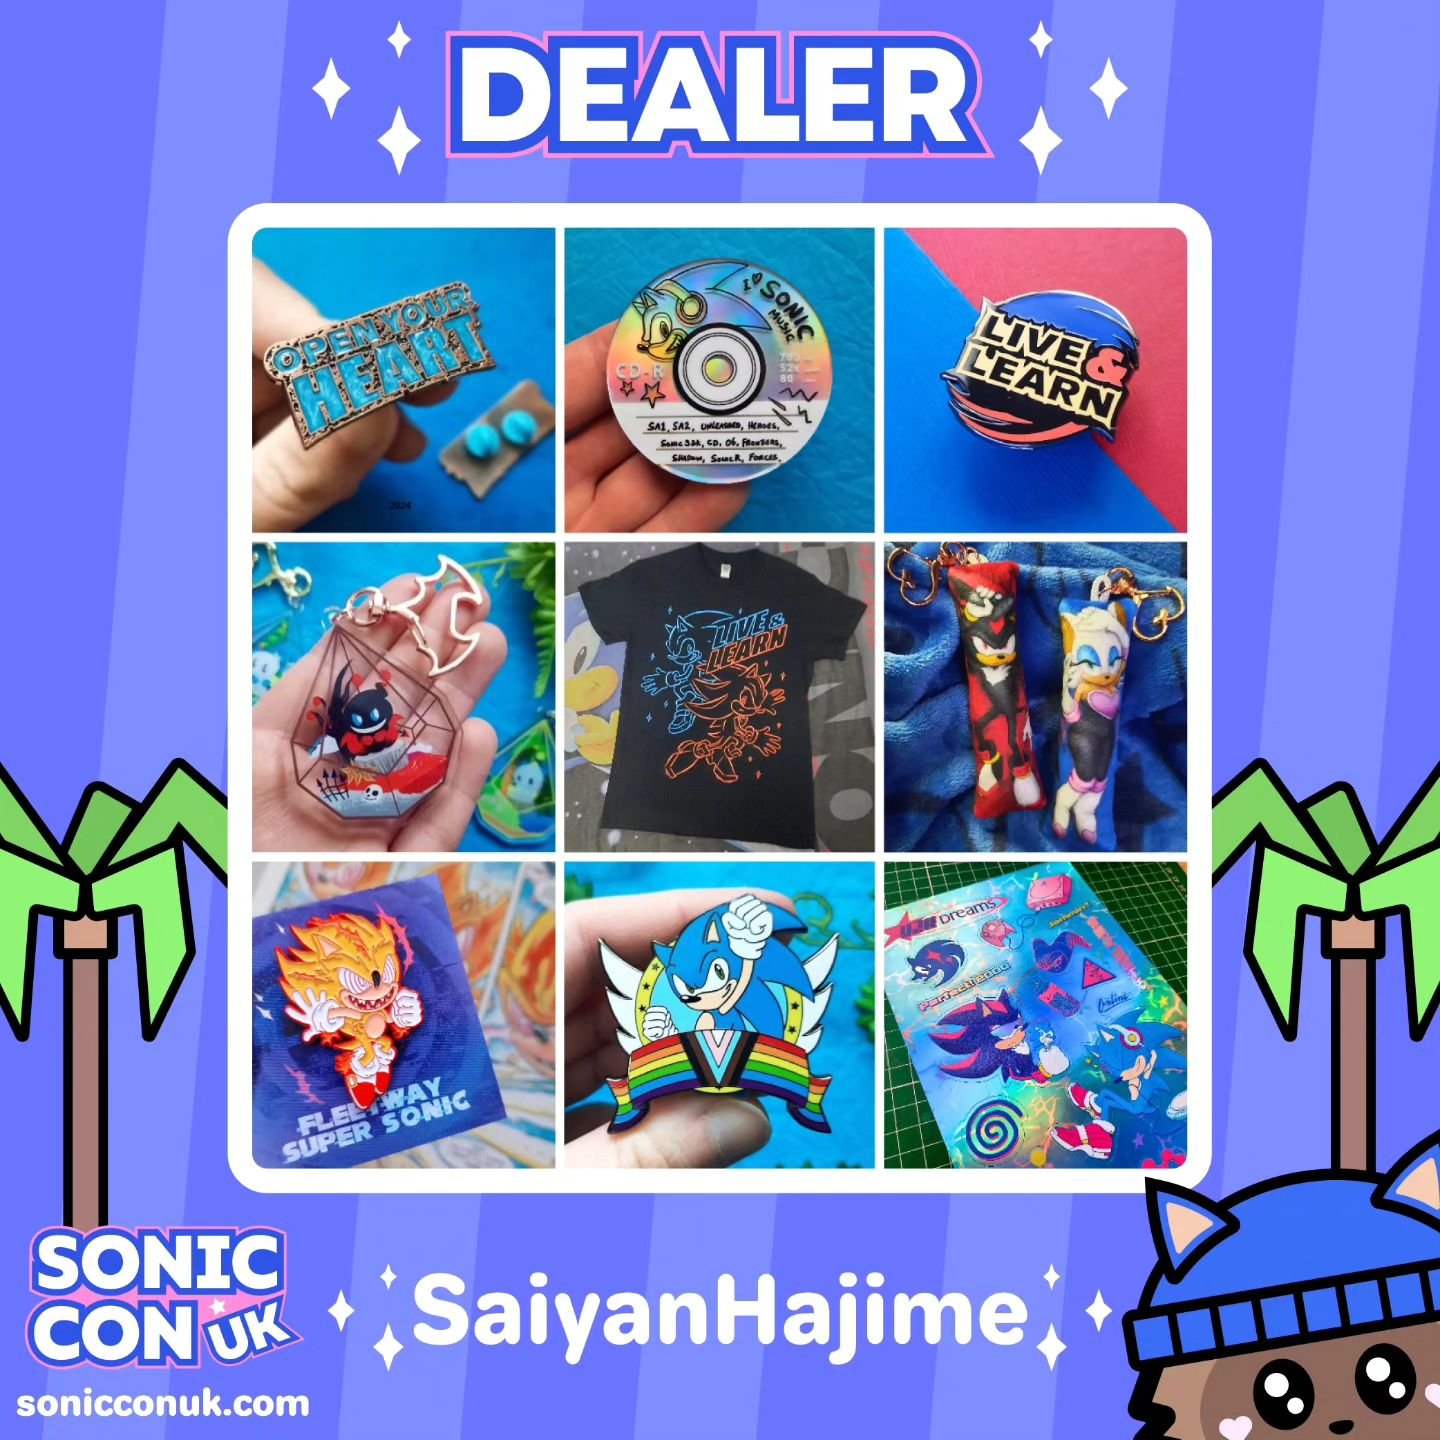 Dealer announcement! 💙🎉 We're excited to welcome @saiyanhajime to Sonic Con UK! 💙🎉 Swipe across to check out their amazing work! They will be selling a variety of enamel pins, keychains, t-shirts, dakis, stickers and more! 💙

#sonicthehedgehog #